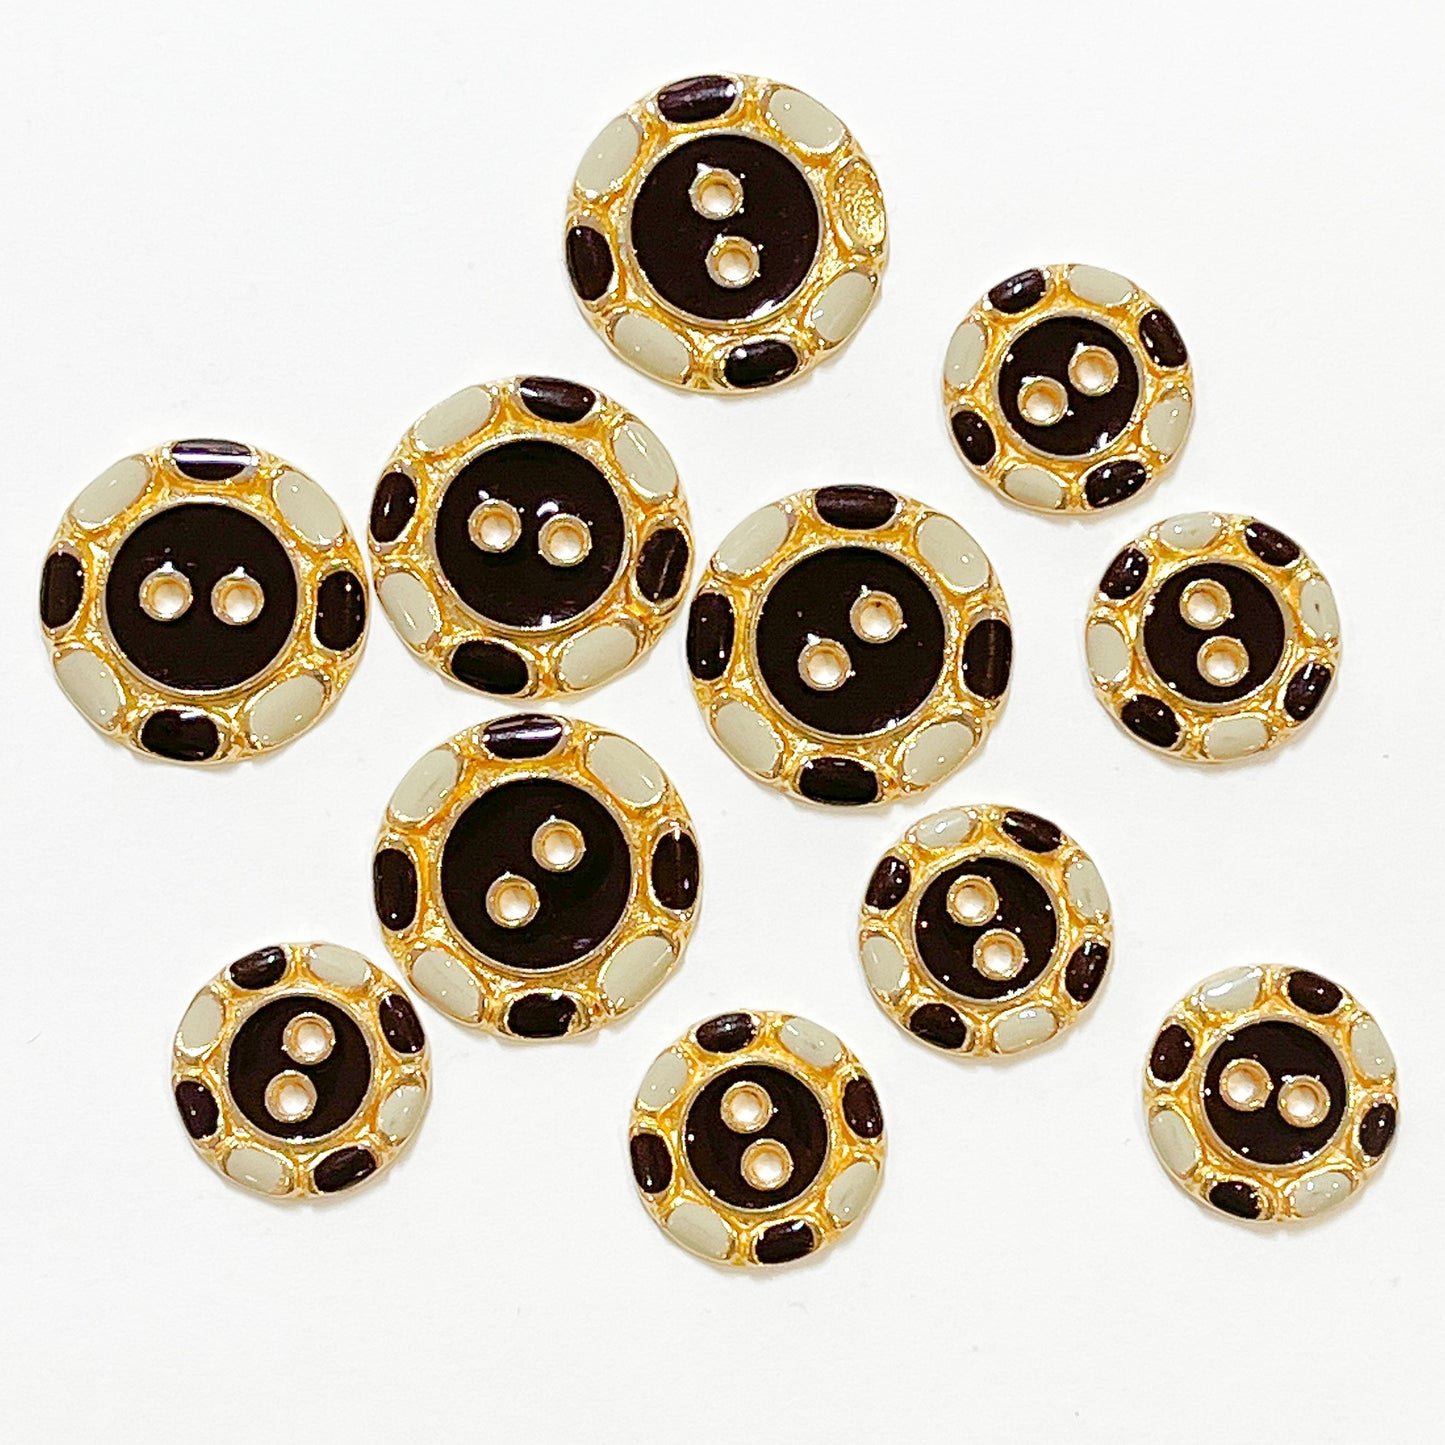 Set of 11 beautiful enamelled buttons from the 1980s. Flat with 2 holes and chestnut brown and ivory enamel work. In excellent condition but please note 1 of the large buttons has one spot of enamel missing